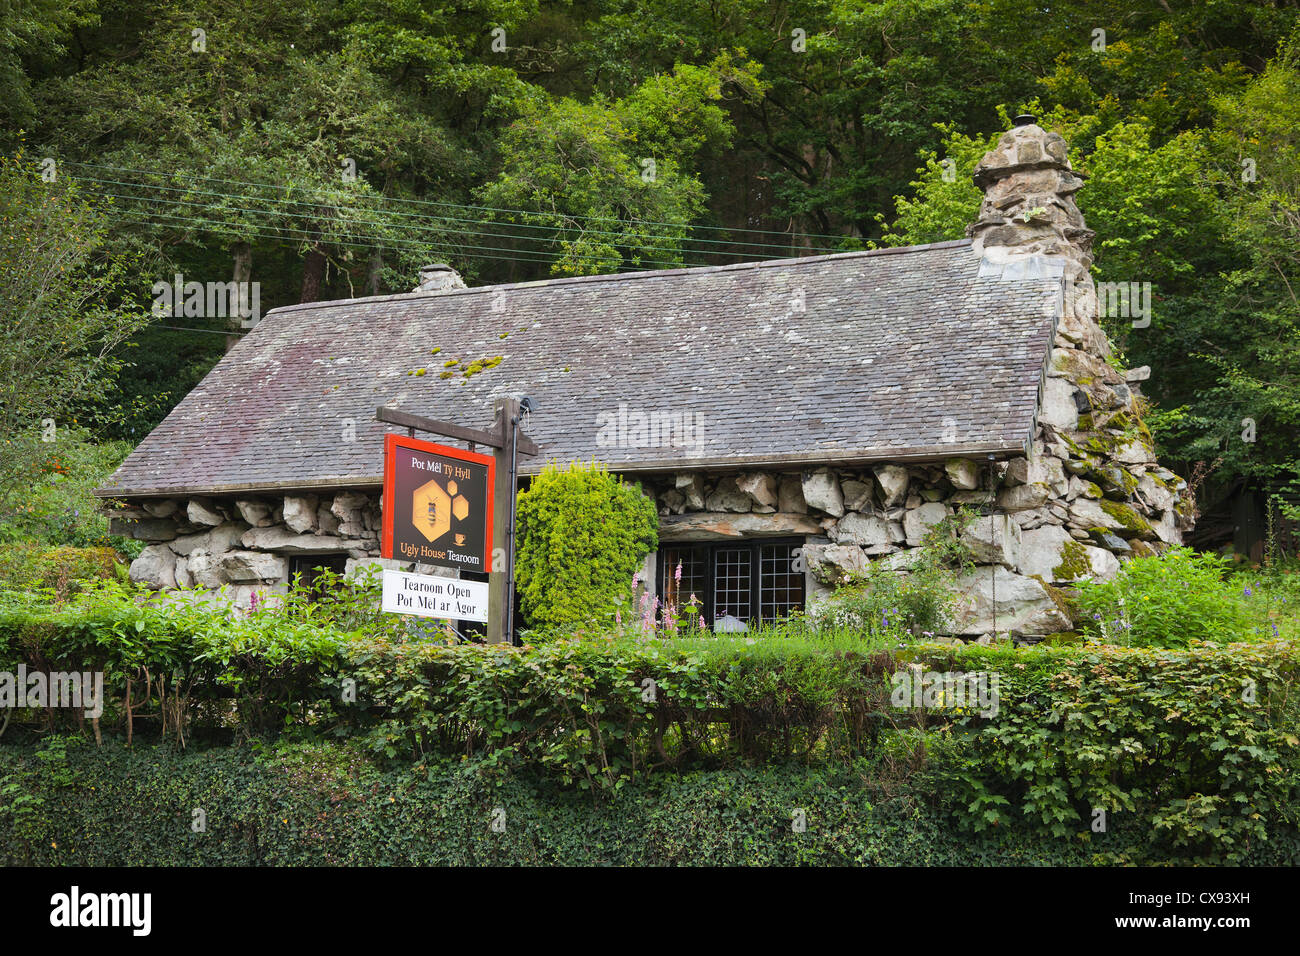 Ugly House, Betws-Y-coed, Ty Hyll, Betws-Y-coed, au Pays de Galles Banque D'Images